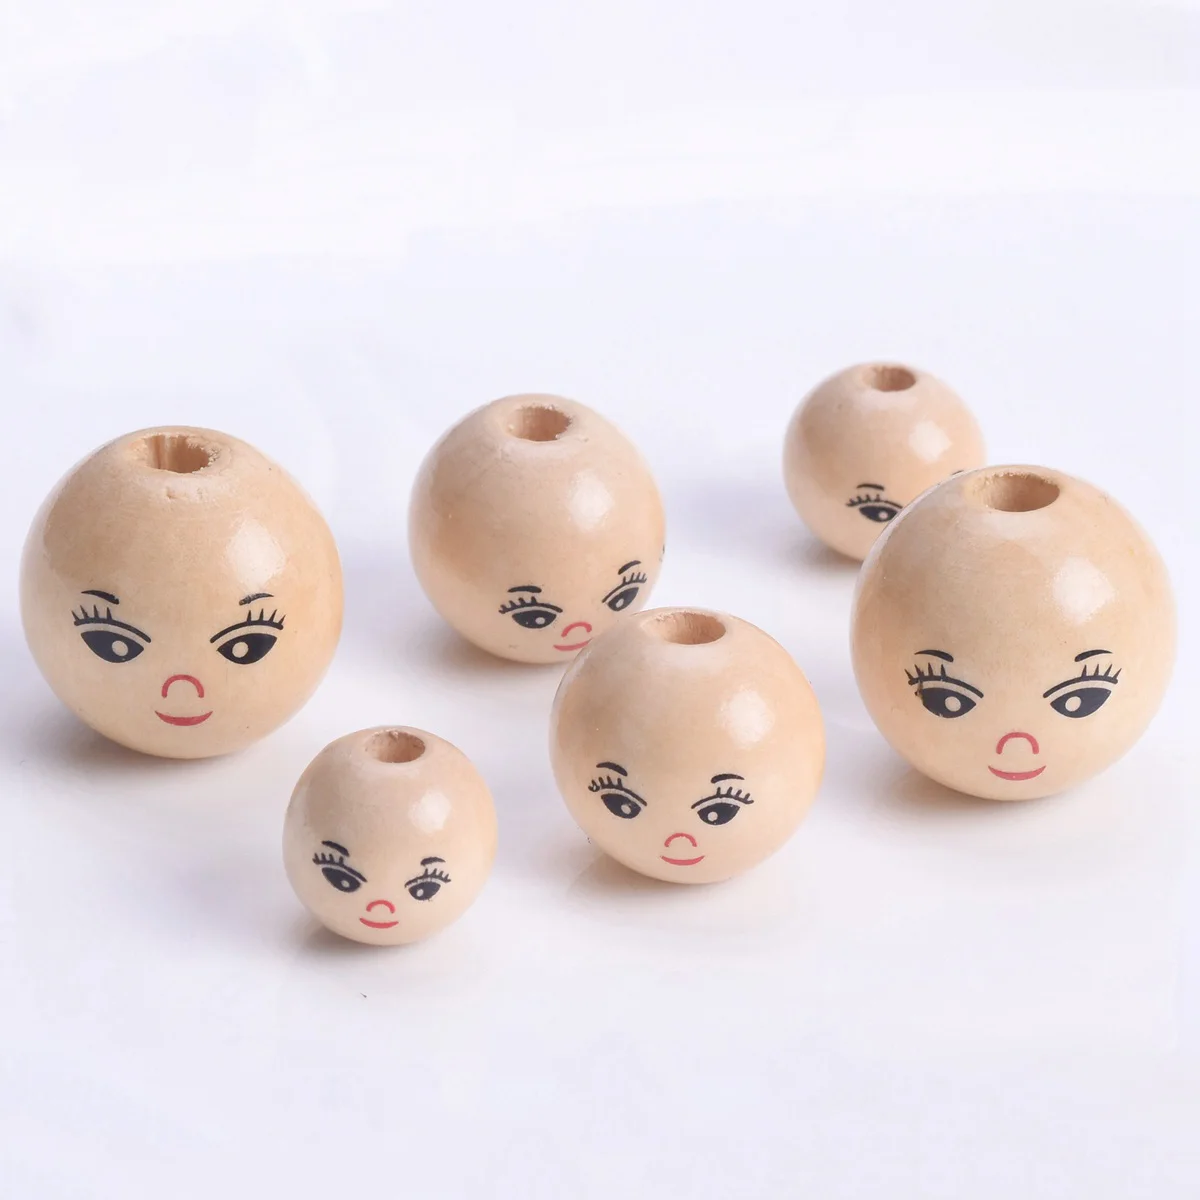 10pcs Round Girl Face Painting 14mm 18mm 22mm Natural Wood Loose Woodcraft Beads For Handcraft DIY Jewelry Making wood headband holder hair accessory scrunchie chains bracelets display organizer stand for teen girl women gifts